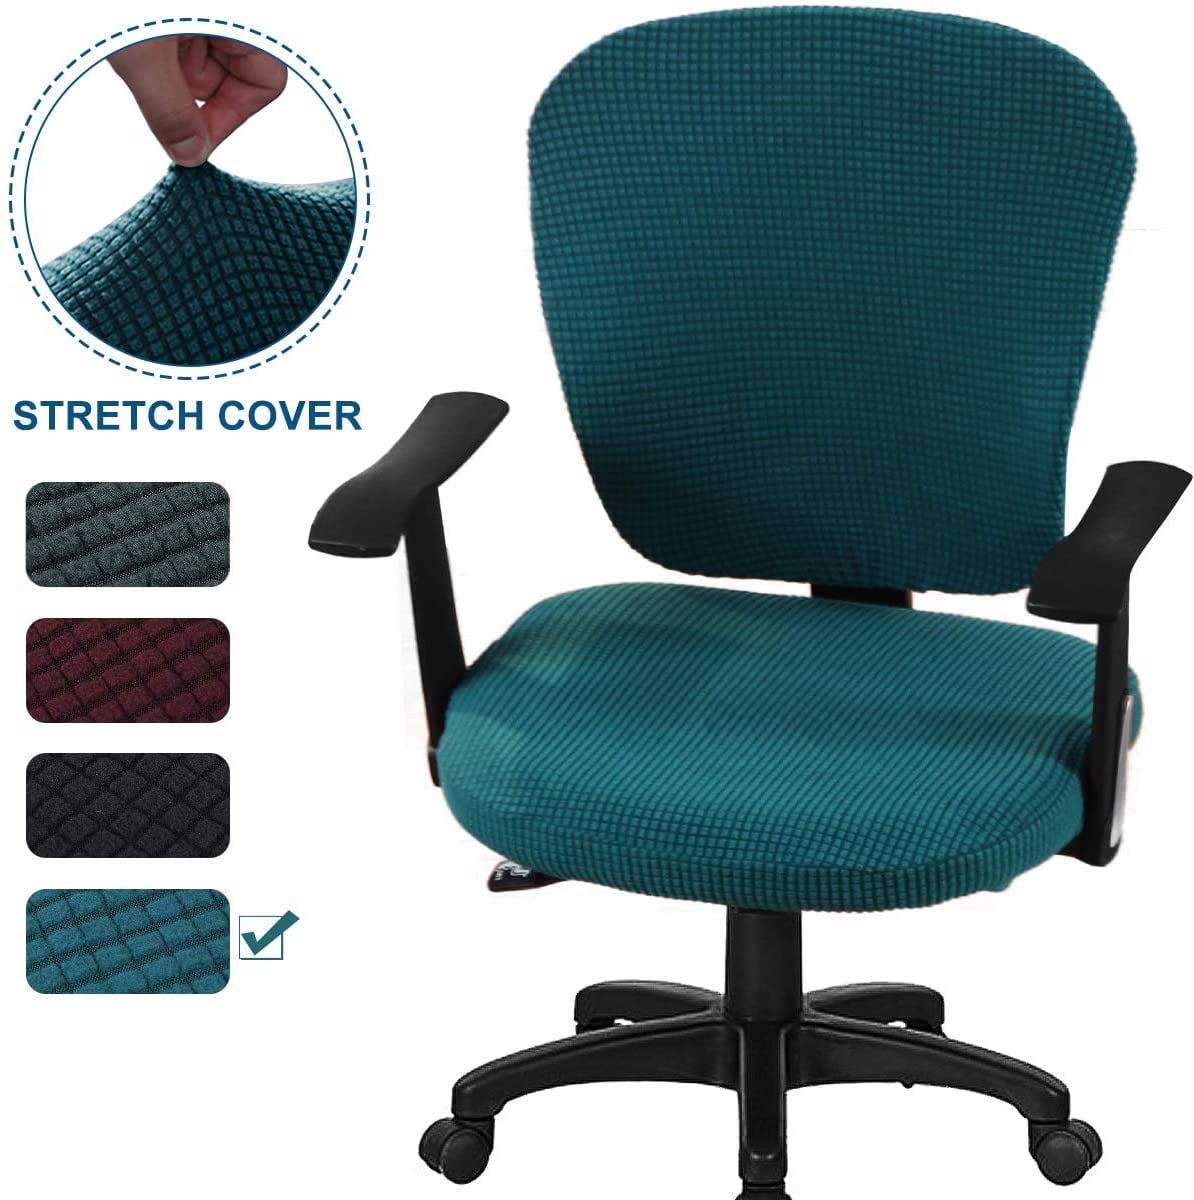 Universal Stretch Chair Cover For Computer Office Swivel Chair Seat Solid Color 